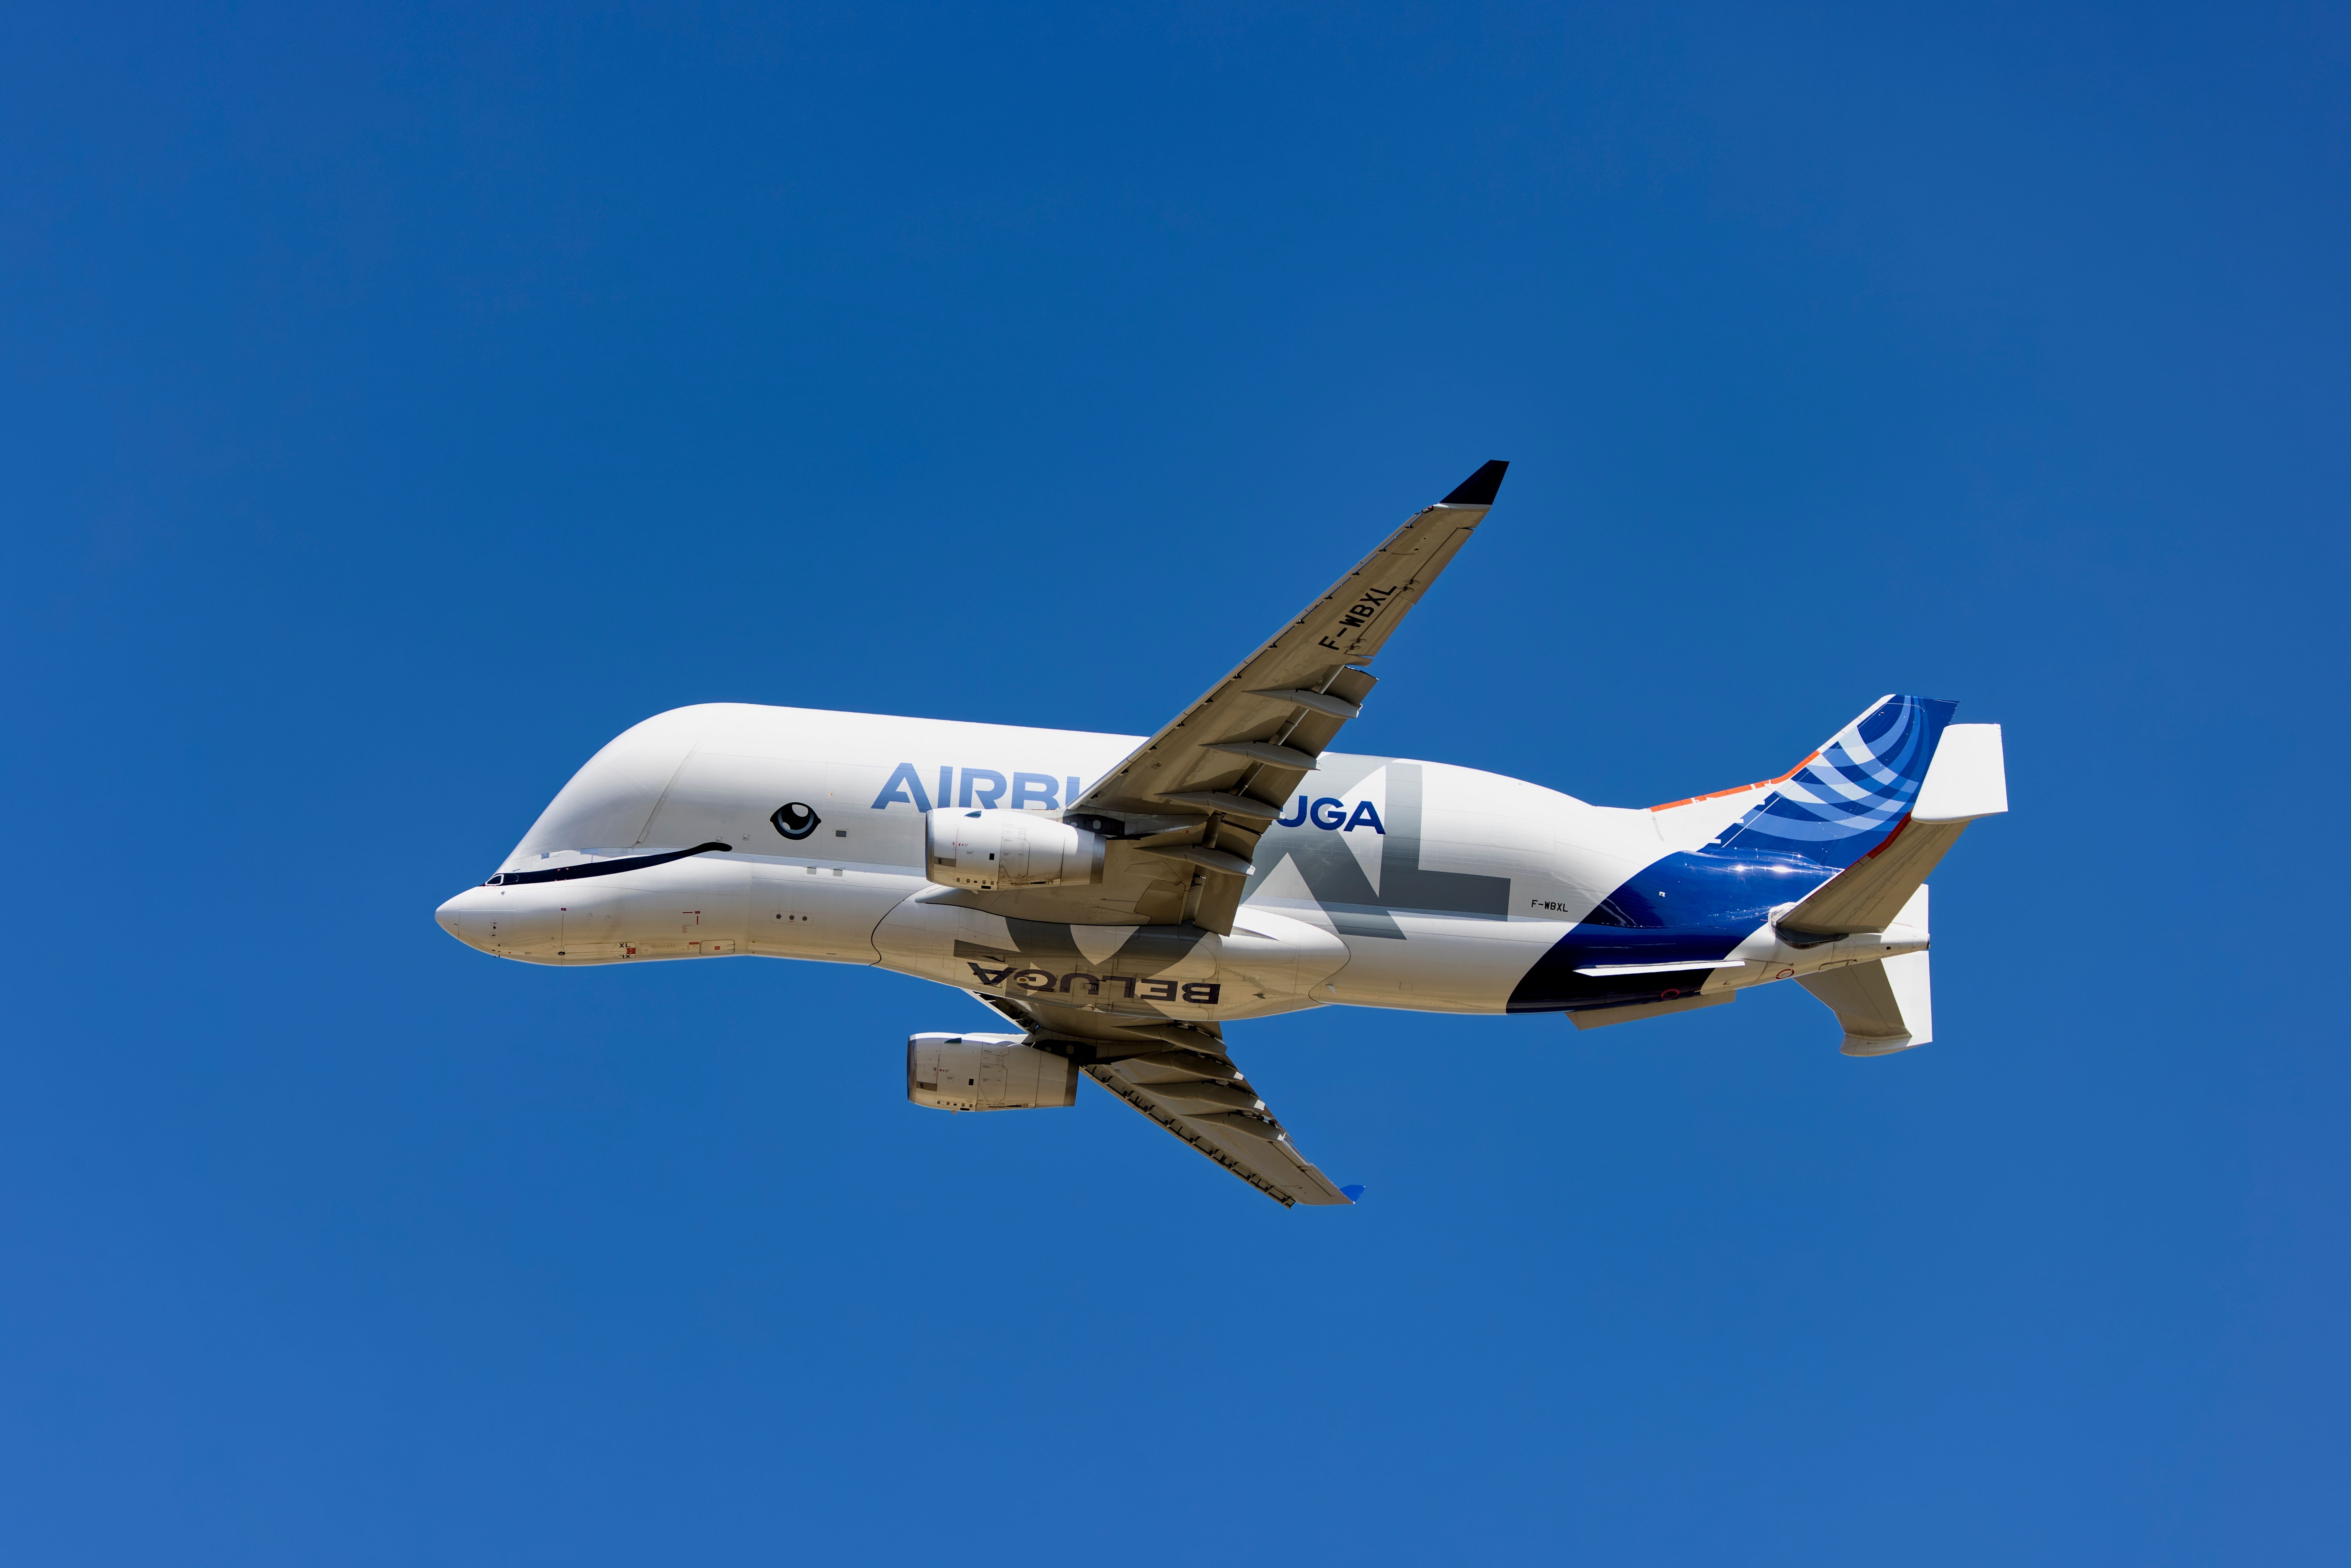 An Airbus BelugaXL flying in the sky.